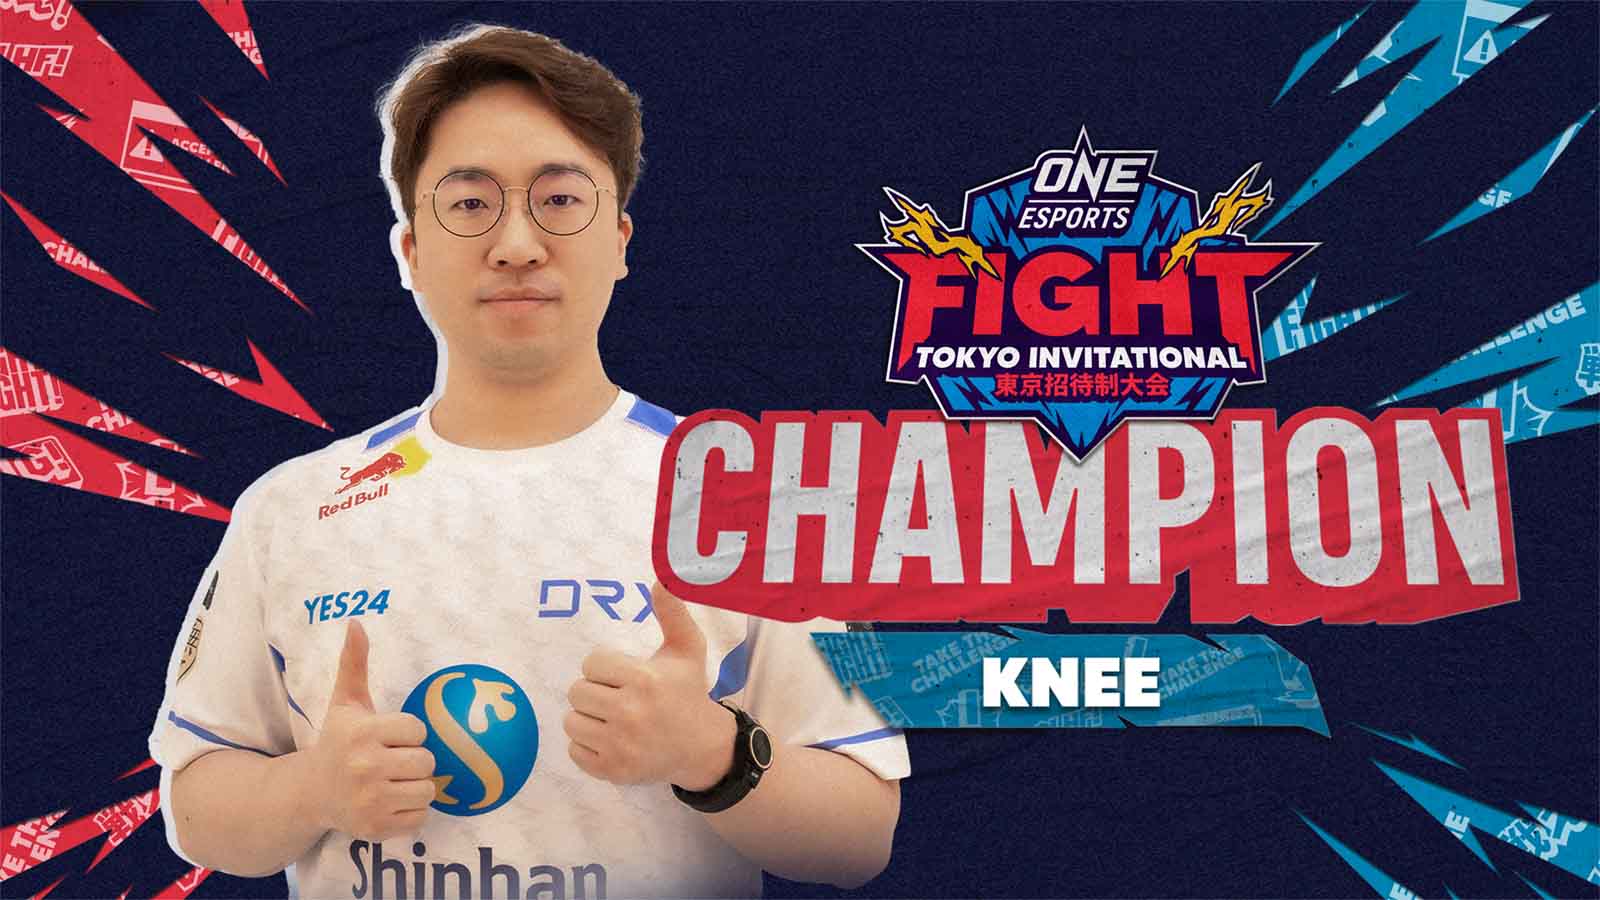 DRX Knee wins the ONE Esports FIGHT! Tokyo Invitational